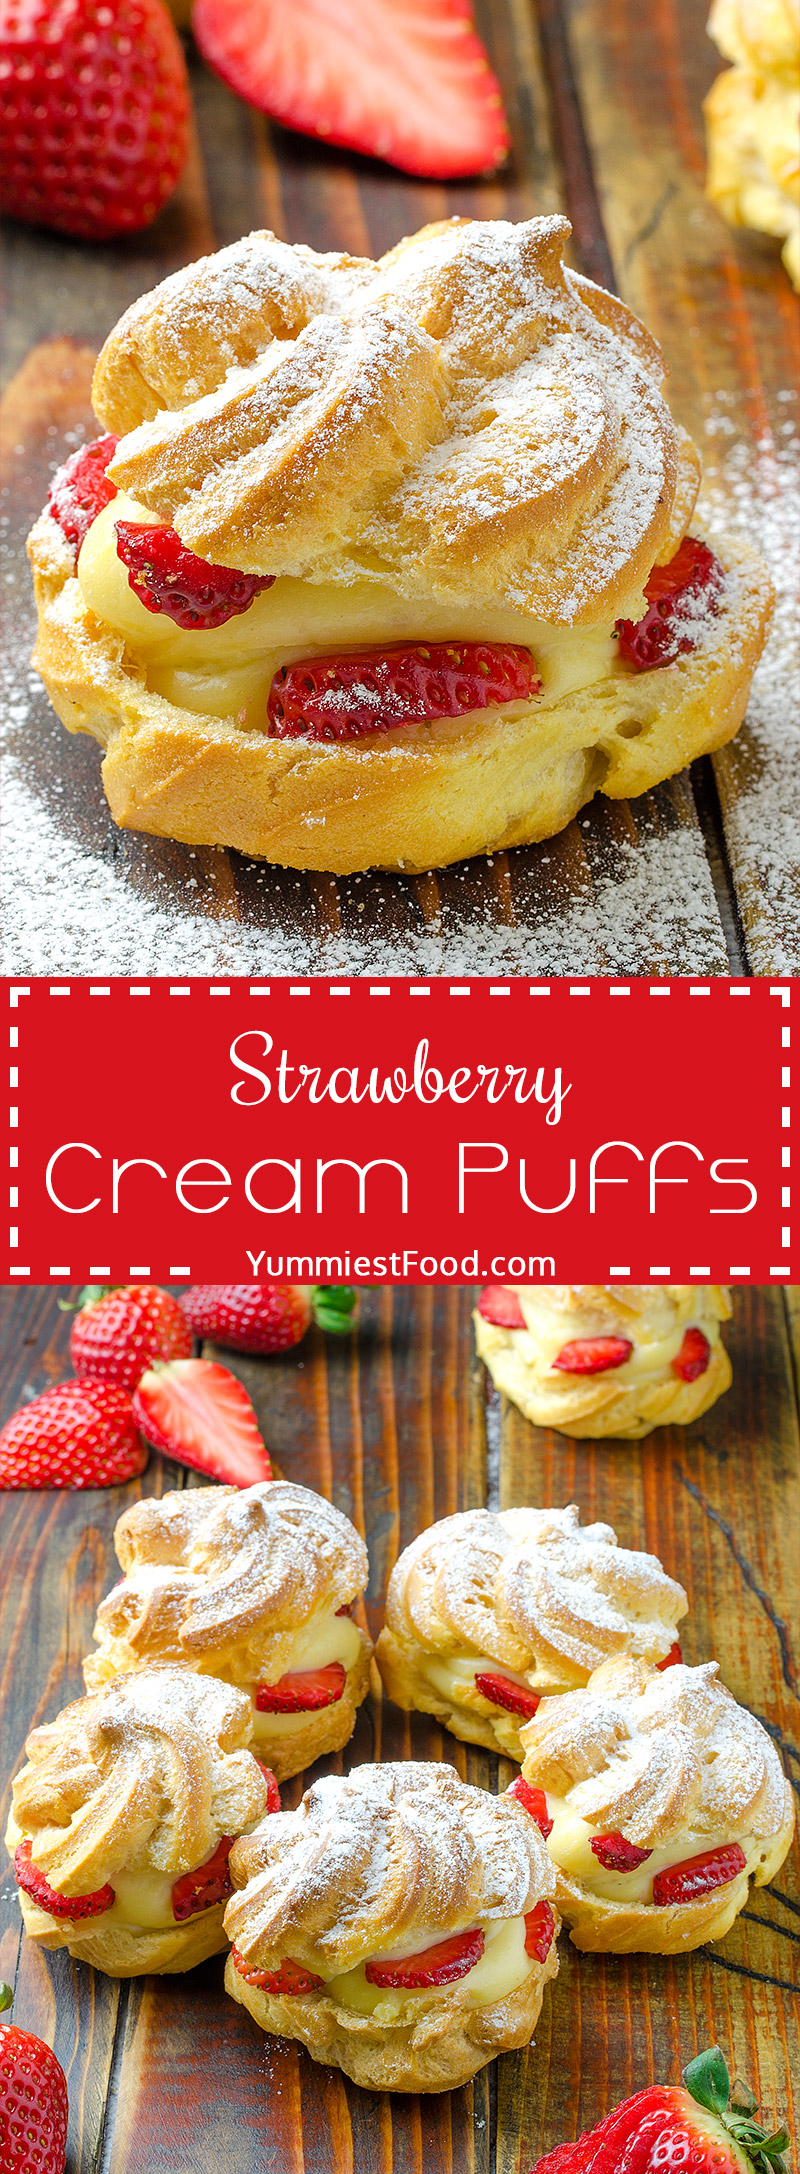 These Strawberry Cream Puffs are so light, fresh, moist and delicious.